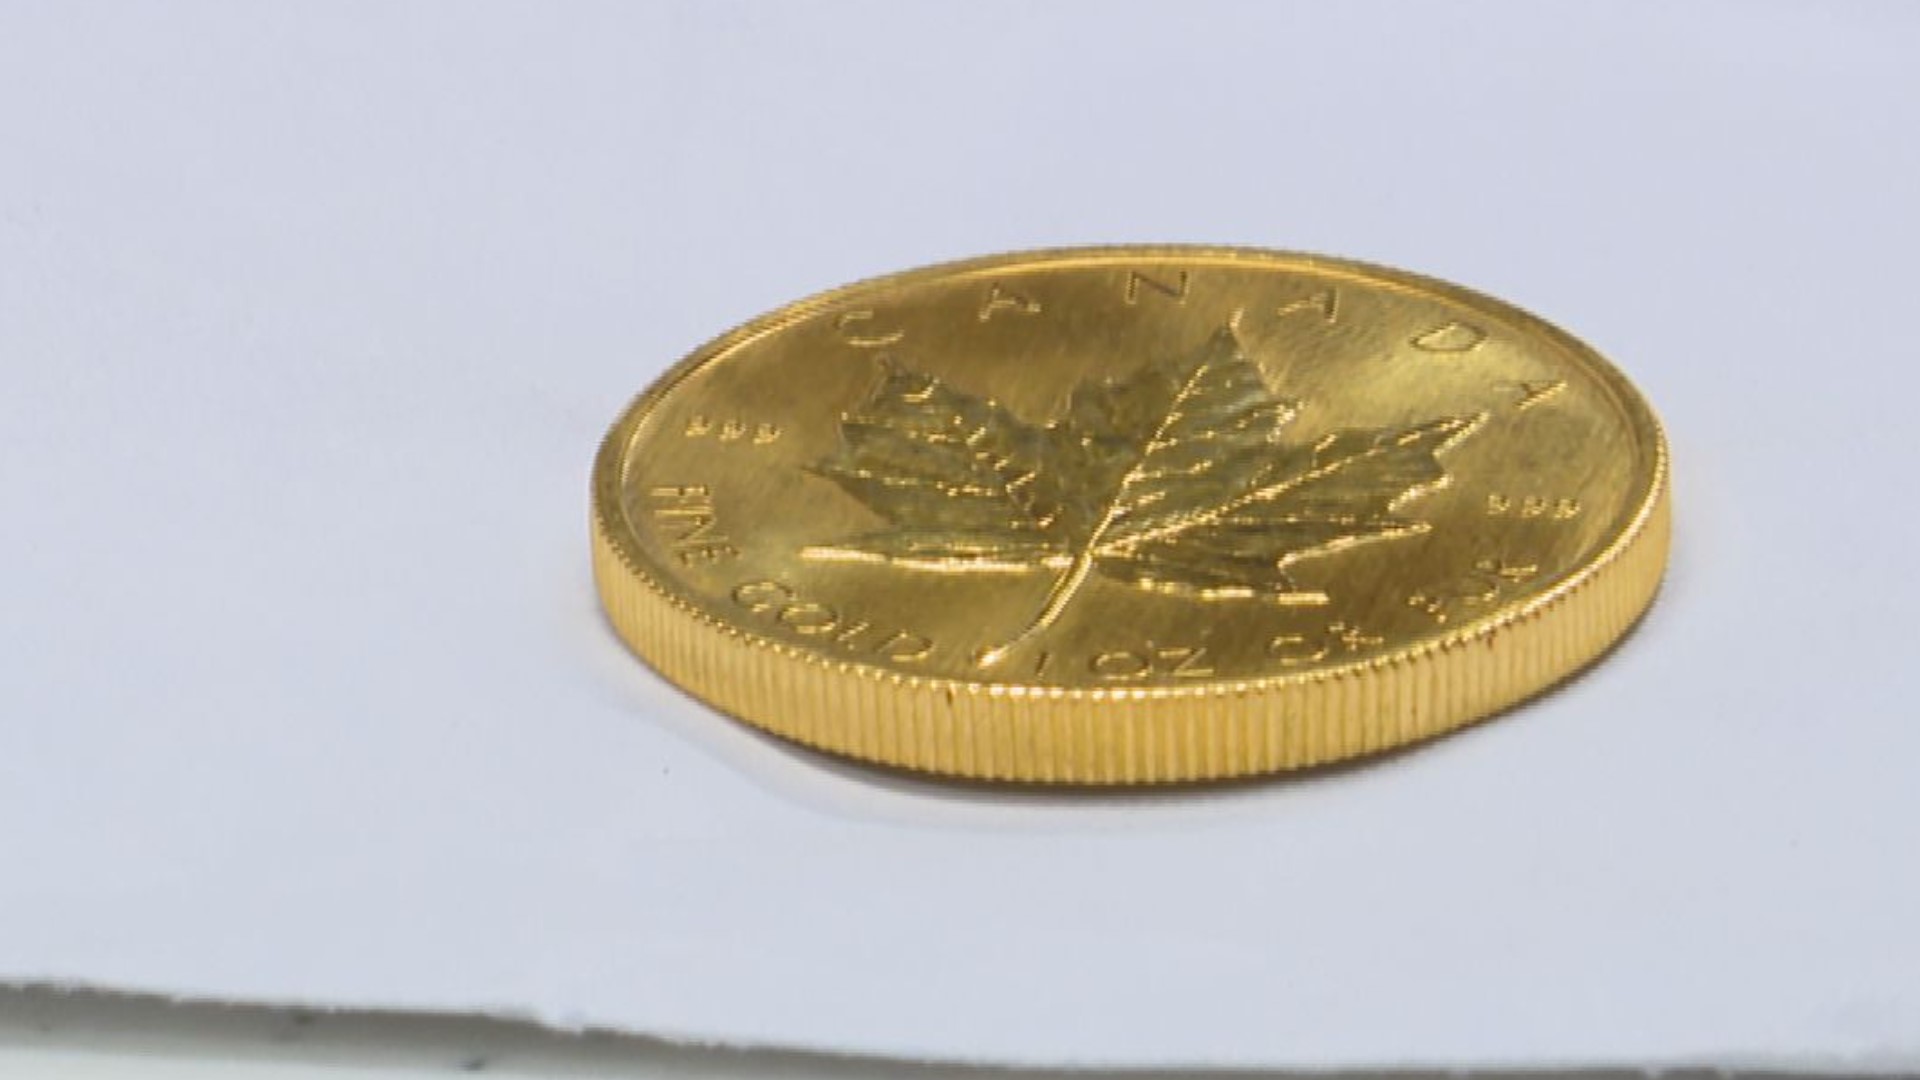 A gold coin worth $1,800 was donated to the Salvation Army in a red kettle in Avon.